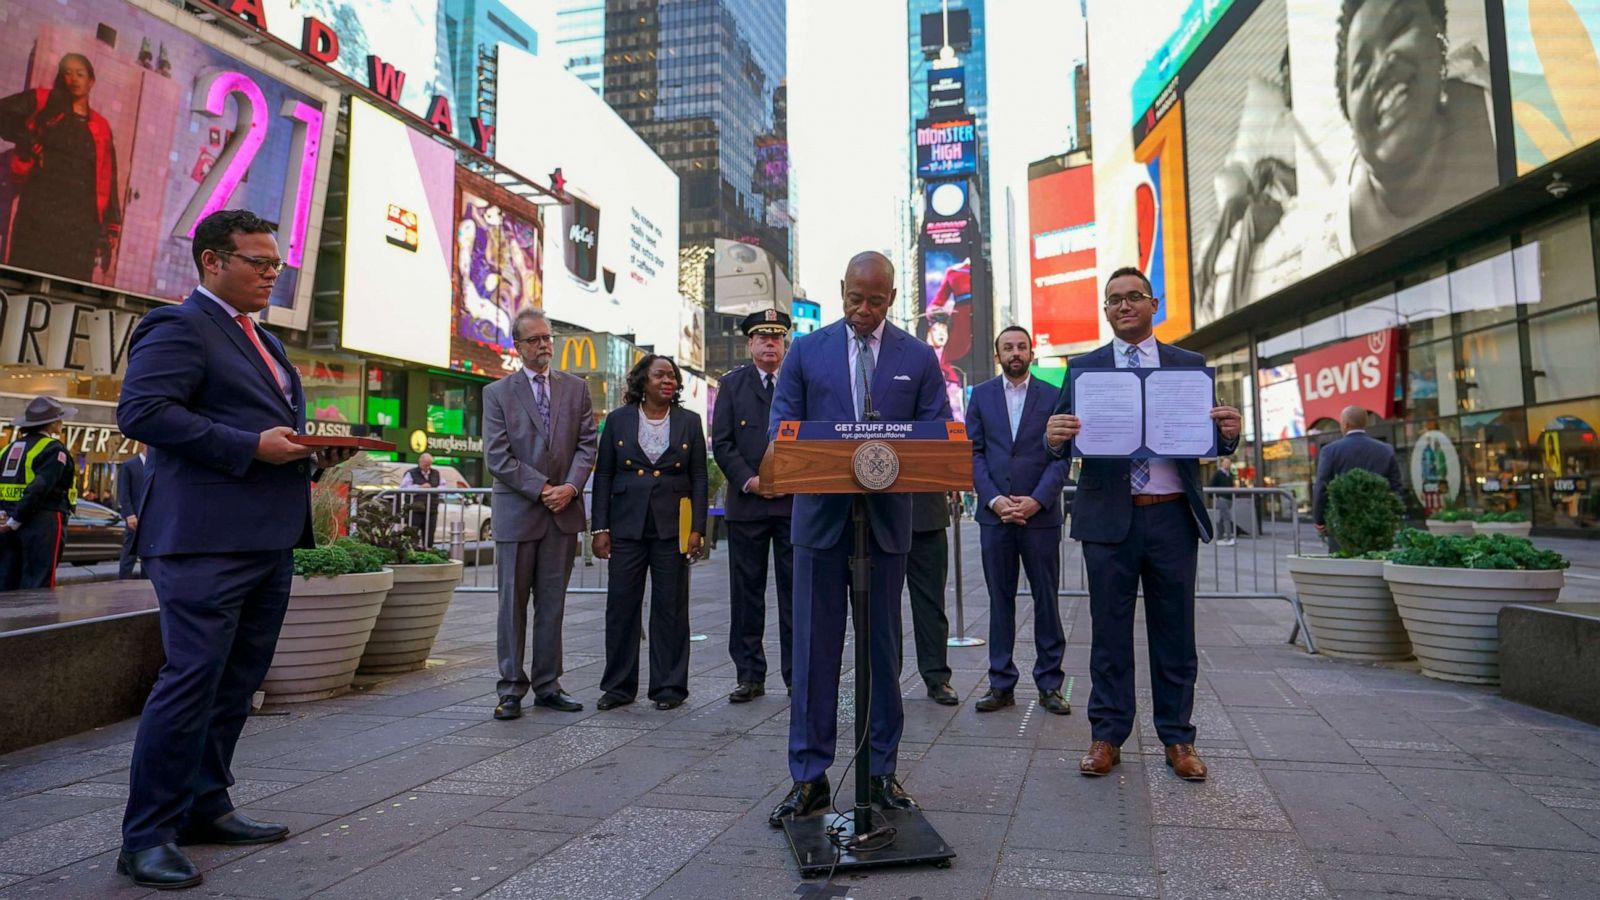 New York City's Times Square officially becomes gun-free zone